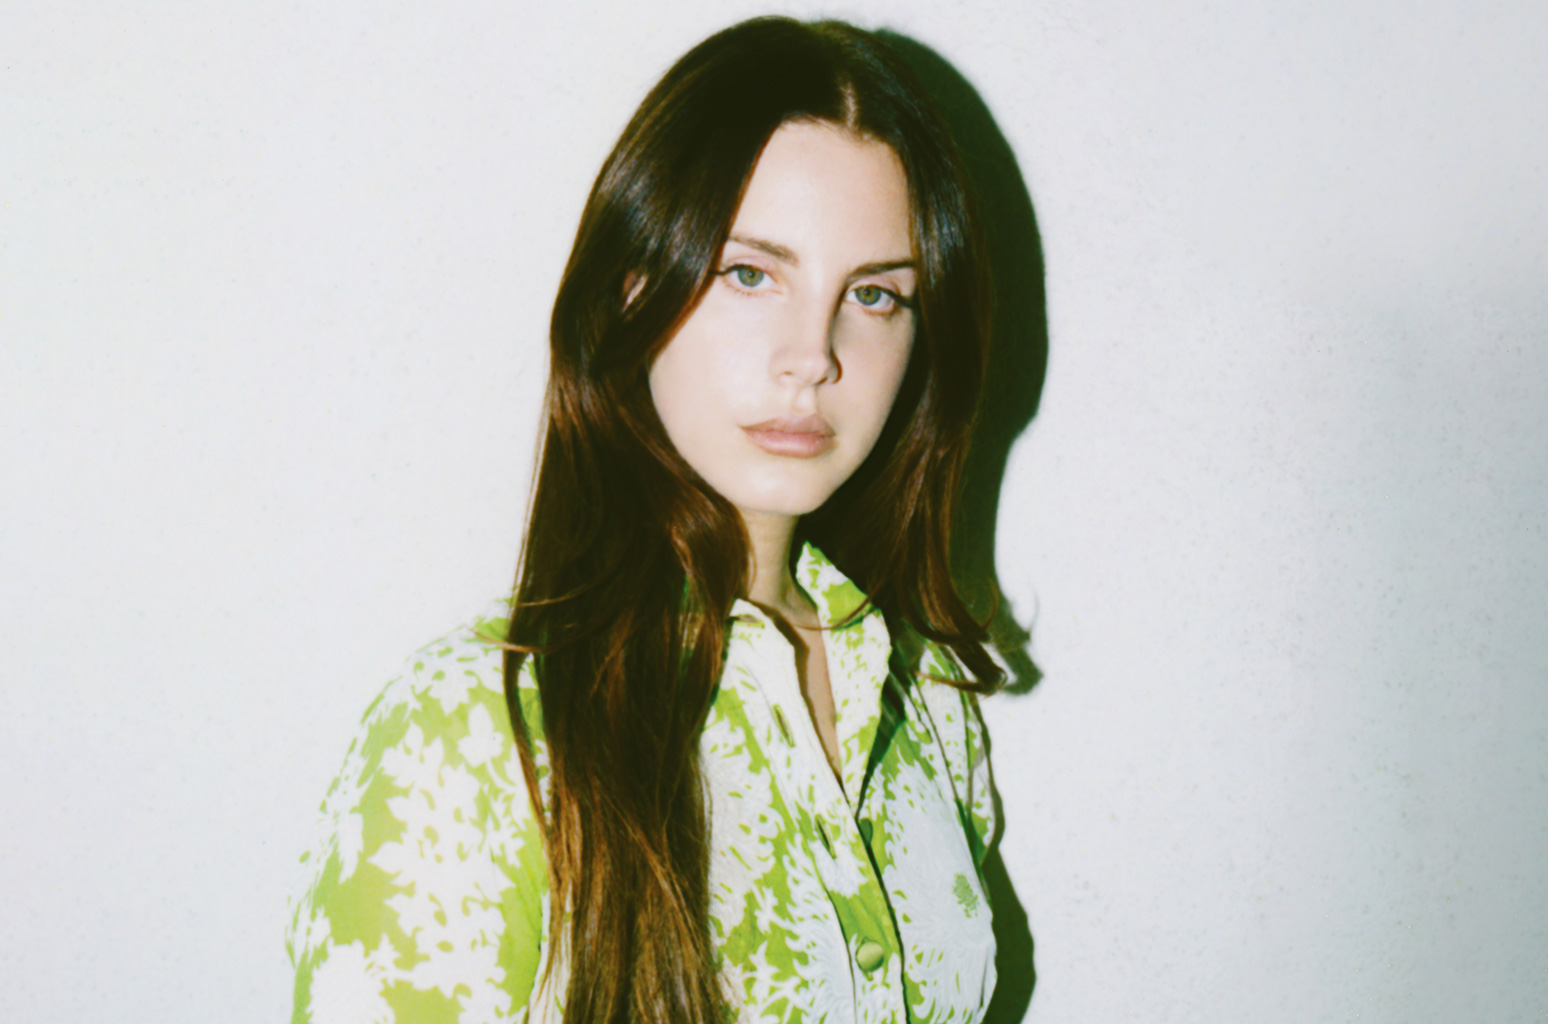 <a href="http://pitchfork.com/features/interview/life-liberty-and-the-pursuit-of-happiness-a-conversation-with-lana-del-rey/" target="_Blank"><B>PITCHFORK</b></a>